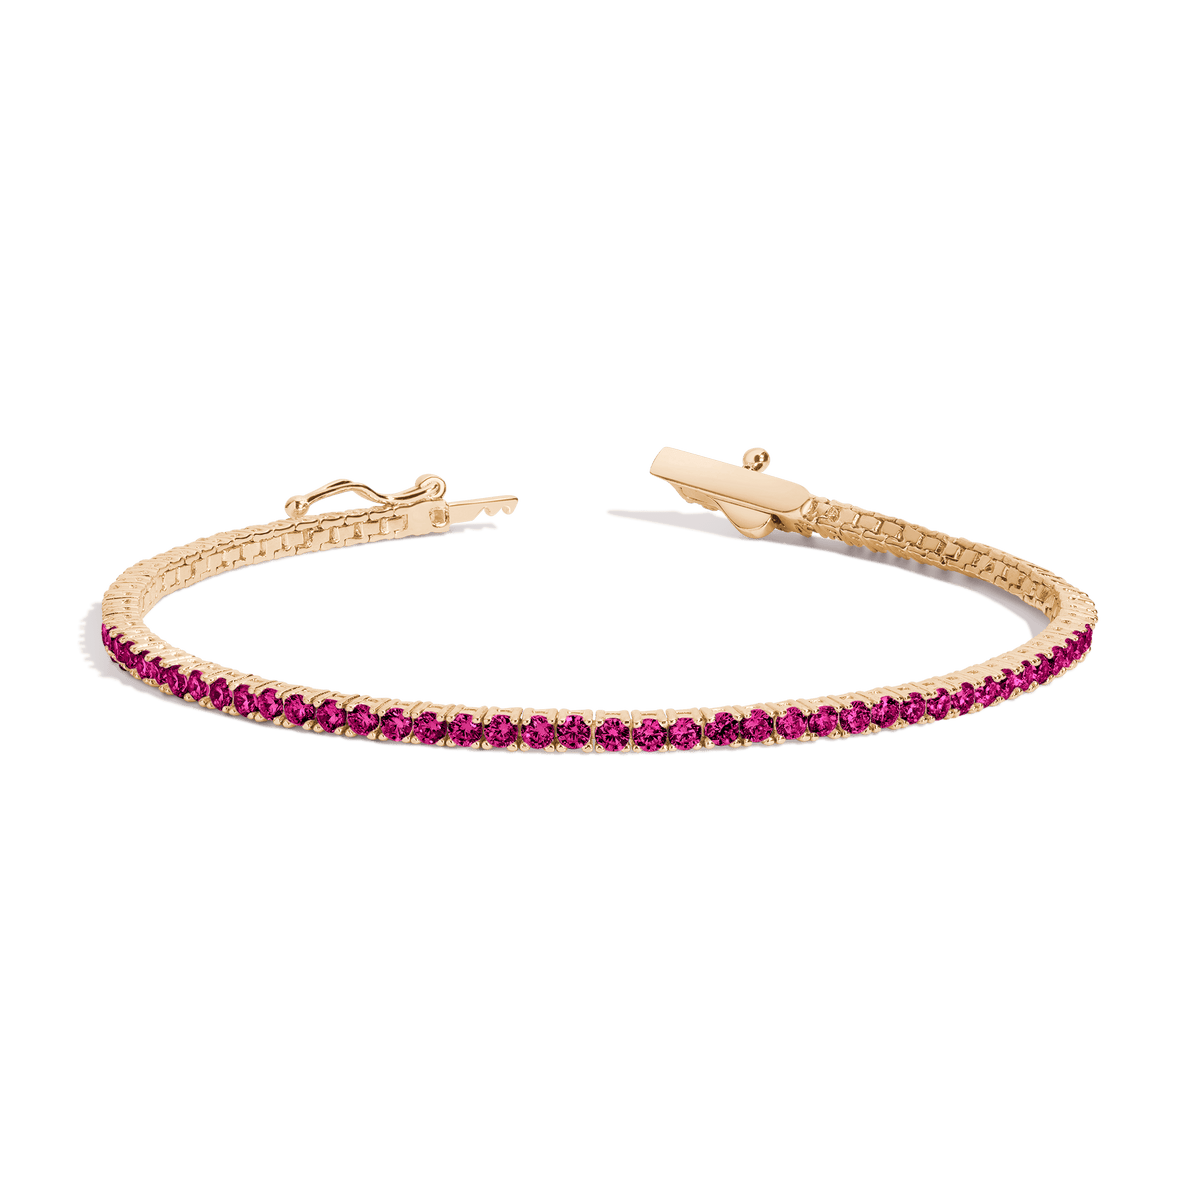 BARANOF JEWELERS: Natural Pigeon Blood Ruby and Diamond Bracelet Set in 14K  White Gold